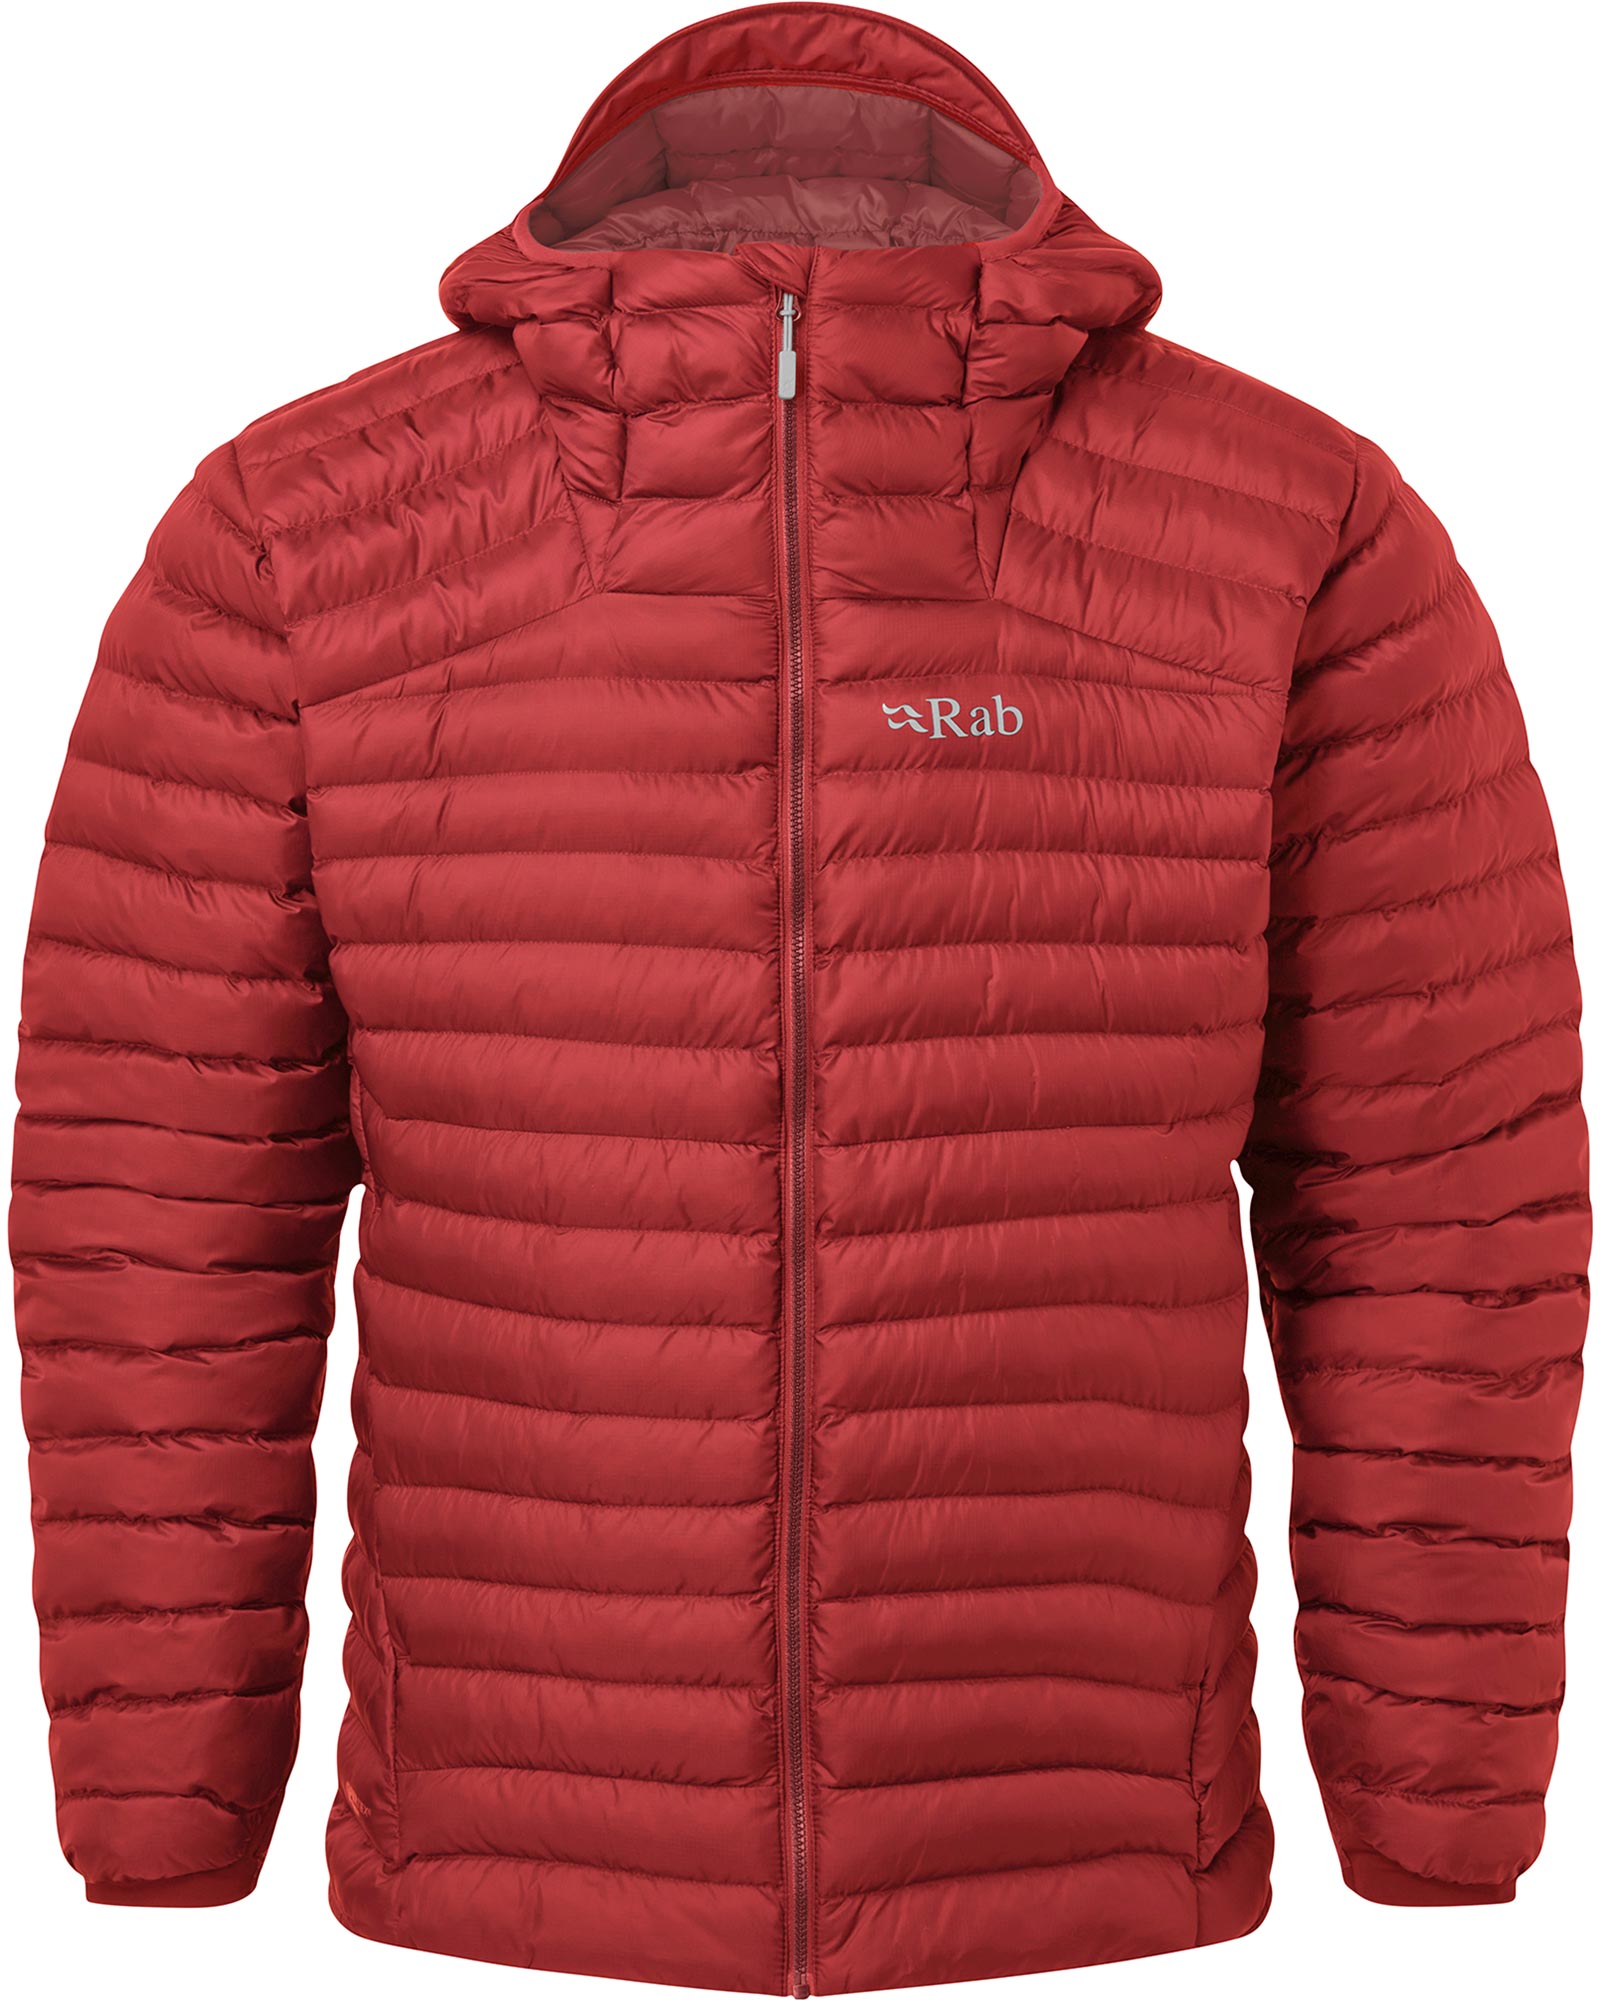 Rab Cirrus Alpine Men’s Insulated Jacket - Ascent Red L